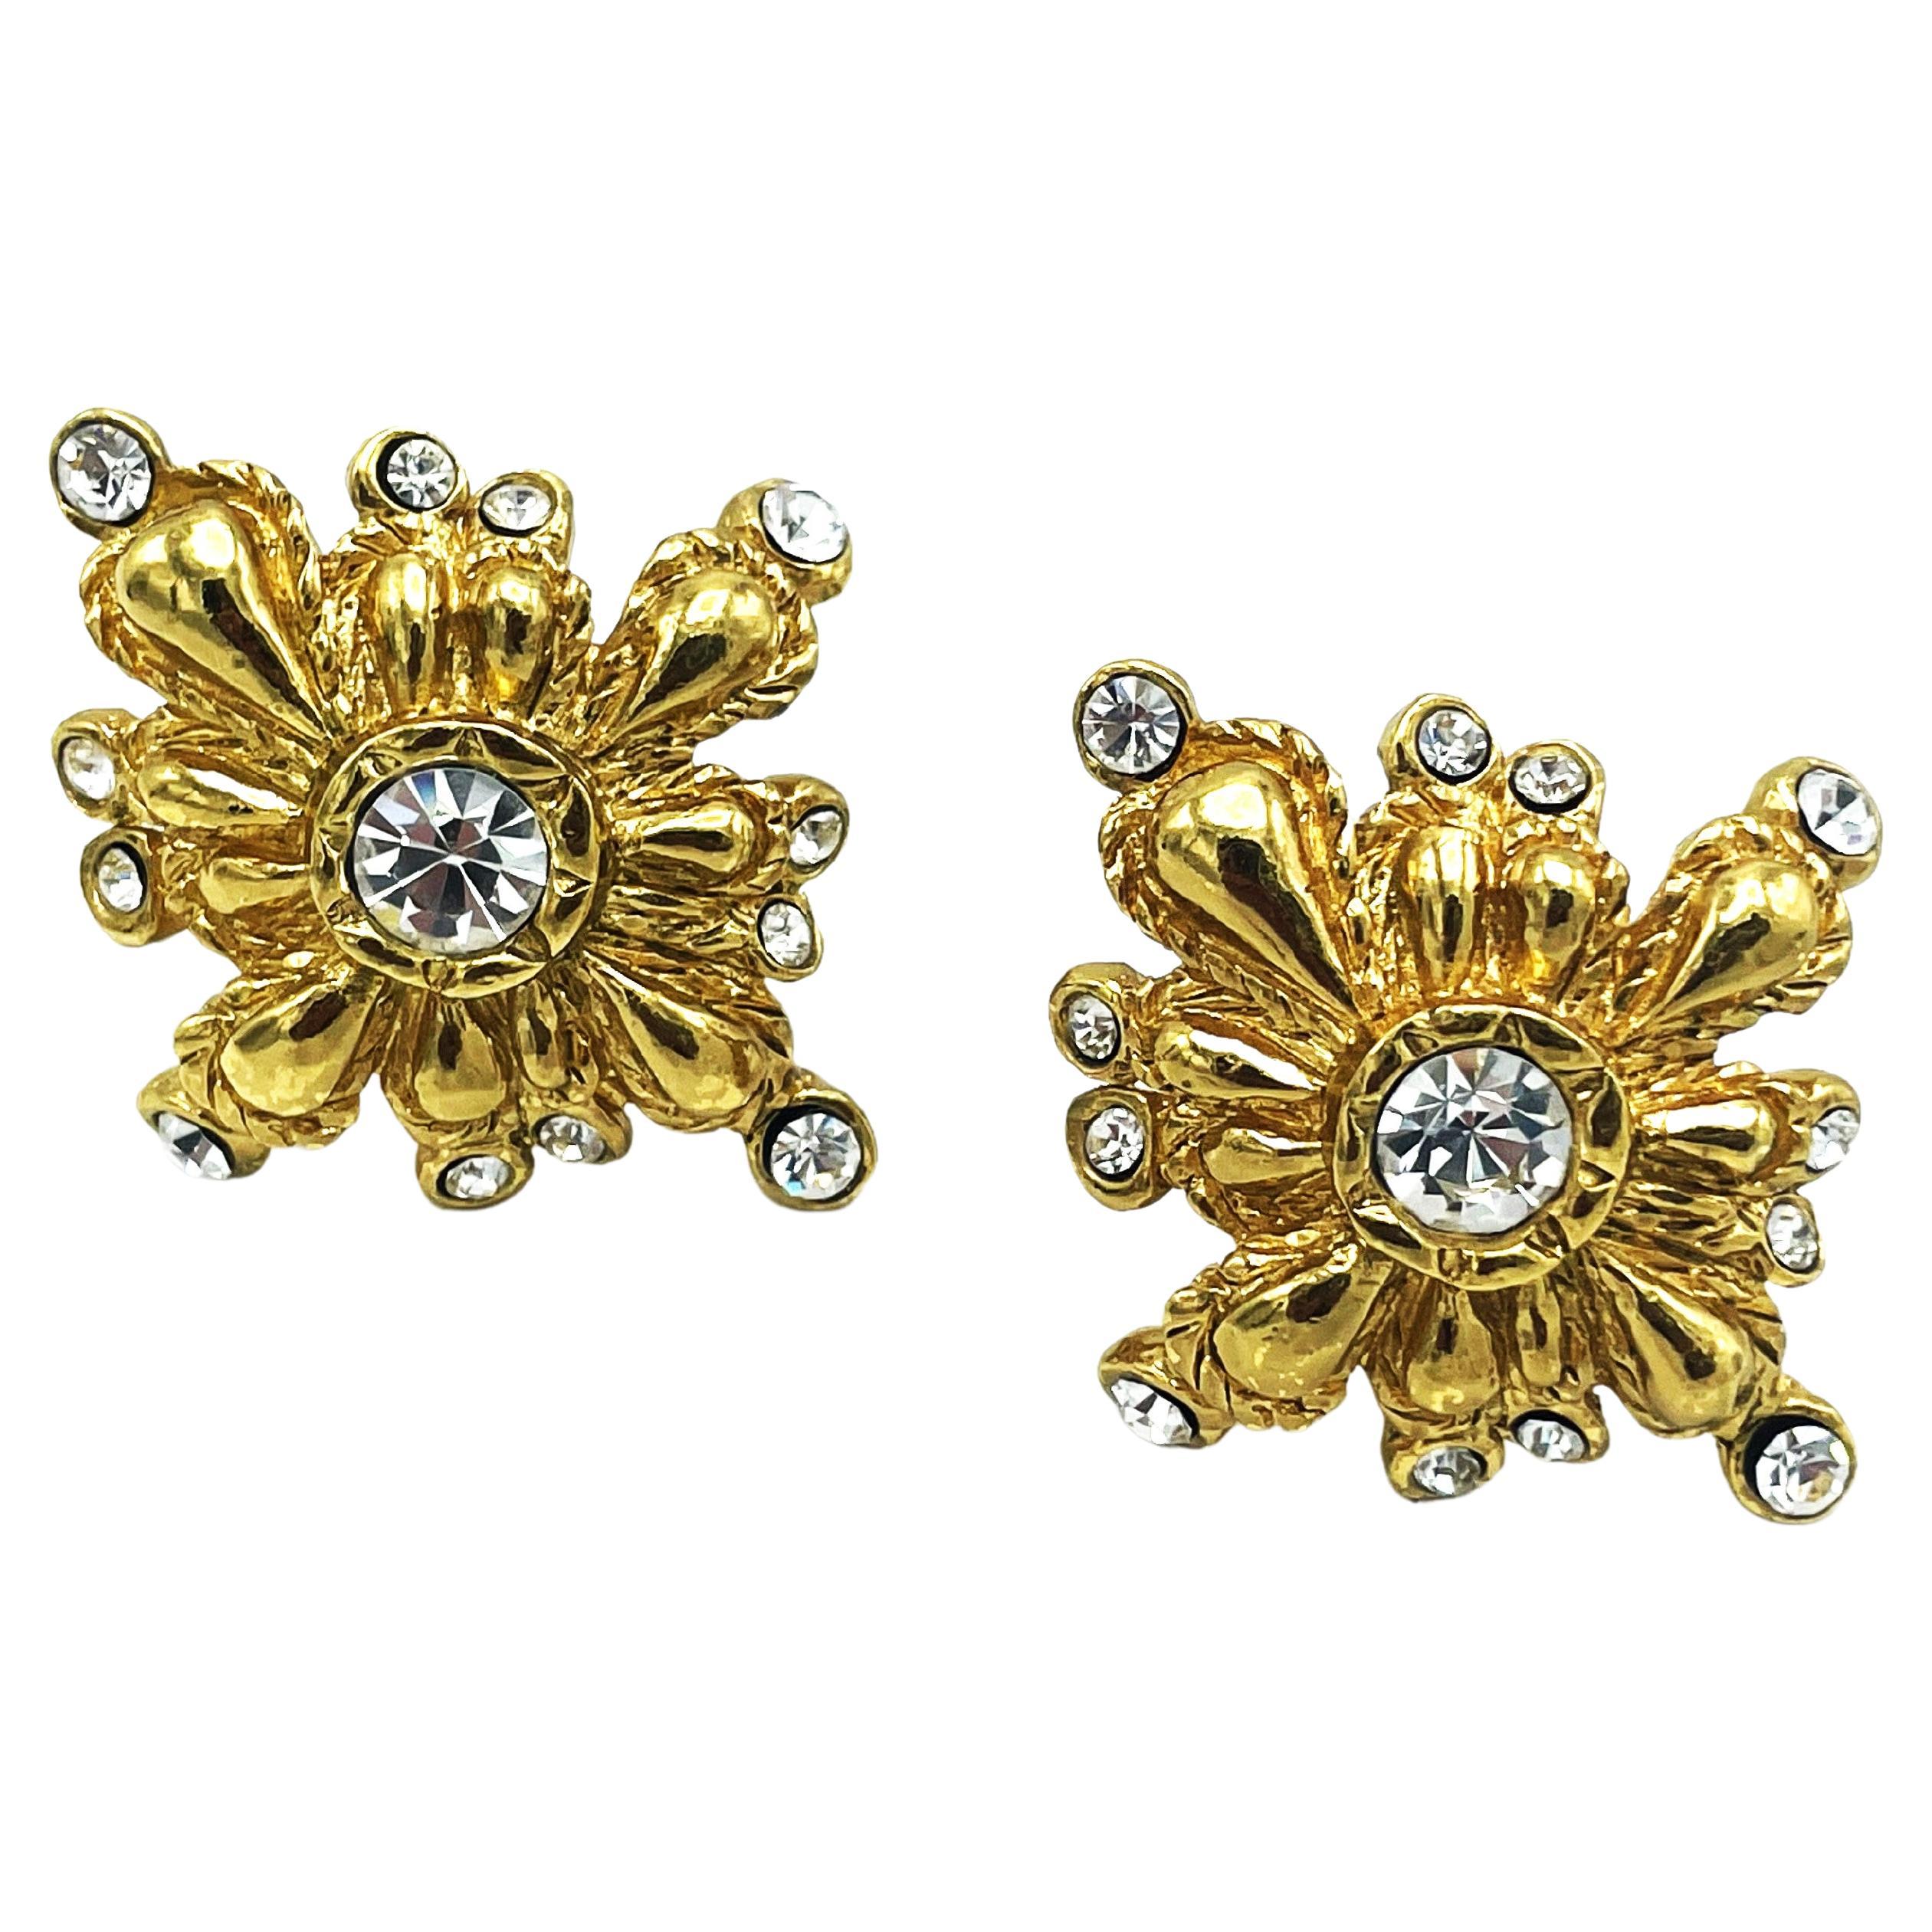 About
Christian Lacroix Paris, clip-on earrings star shaped gold plated with rhinetones, 1980/90s
Measurement
Heigth  4,5 cm 
Wide     3,8 cm 
Features
- original Ch. Lacroix Paris, signed  on the back
- Star-shaped with a large cut rhinestone in